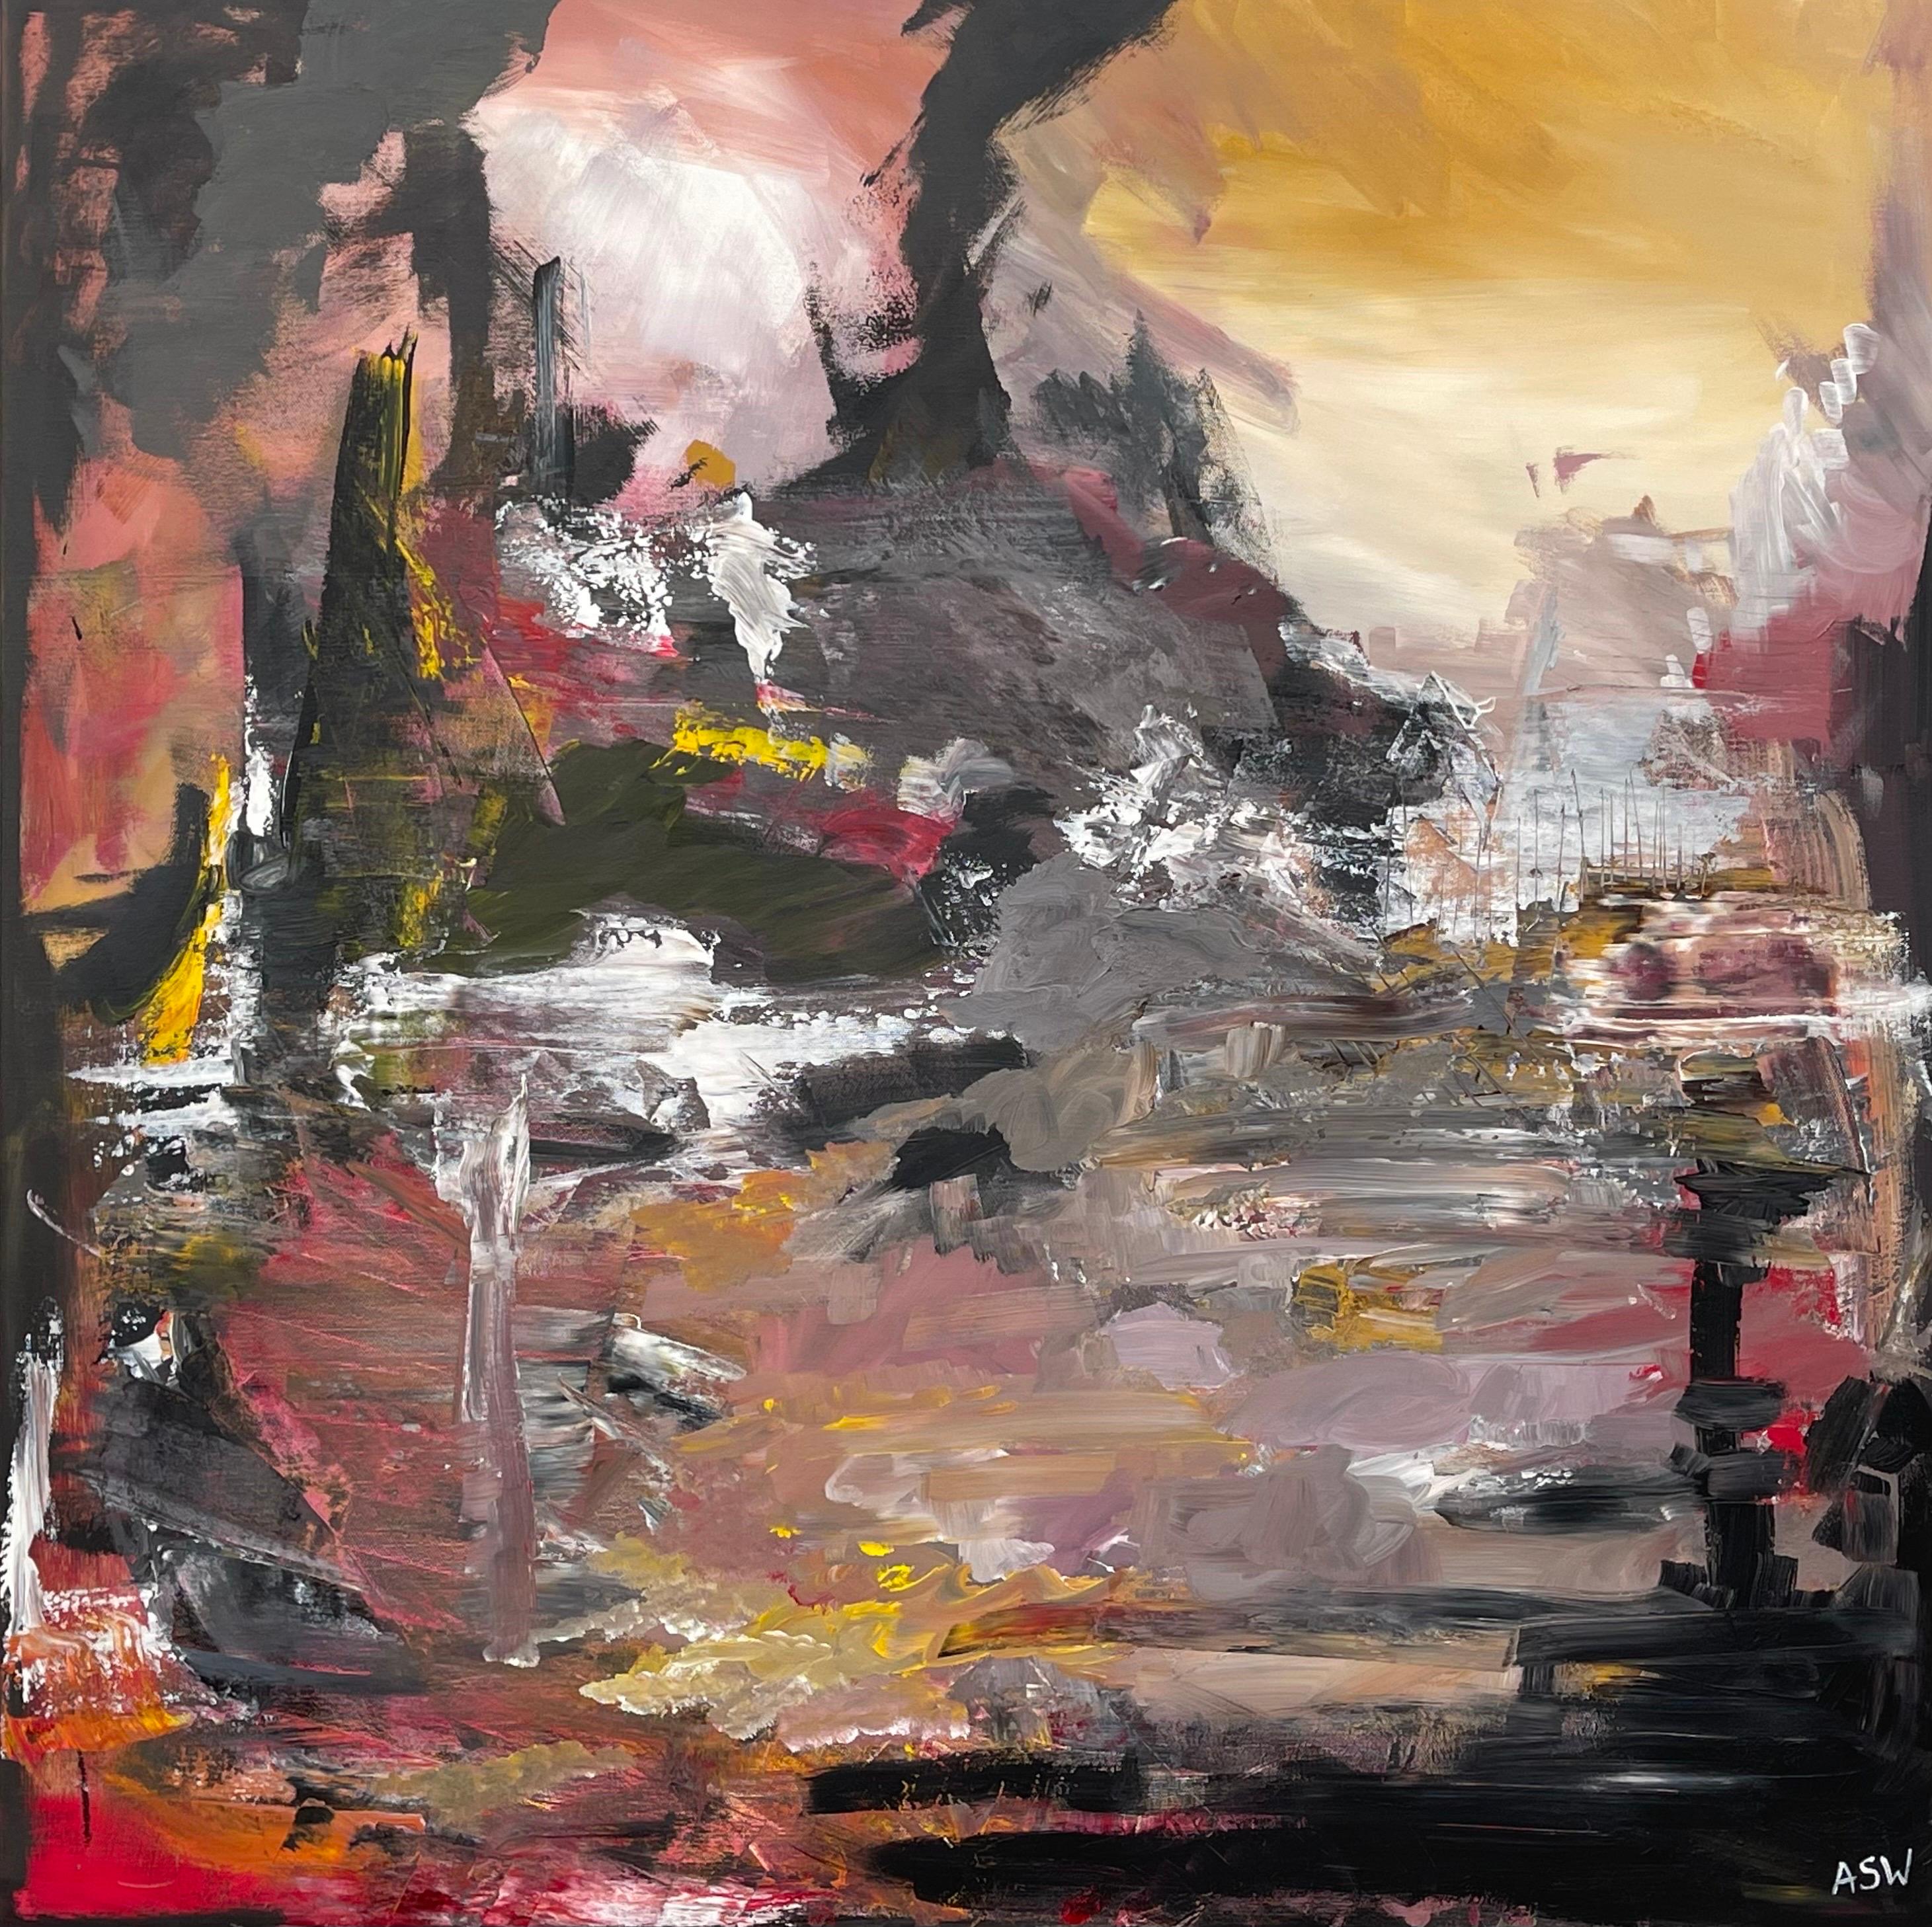 Angela Wakefield Abstract Painting - Black Yellow & Red Abstract Expressionist Art by Contemporary British Artist